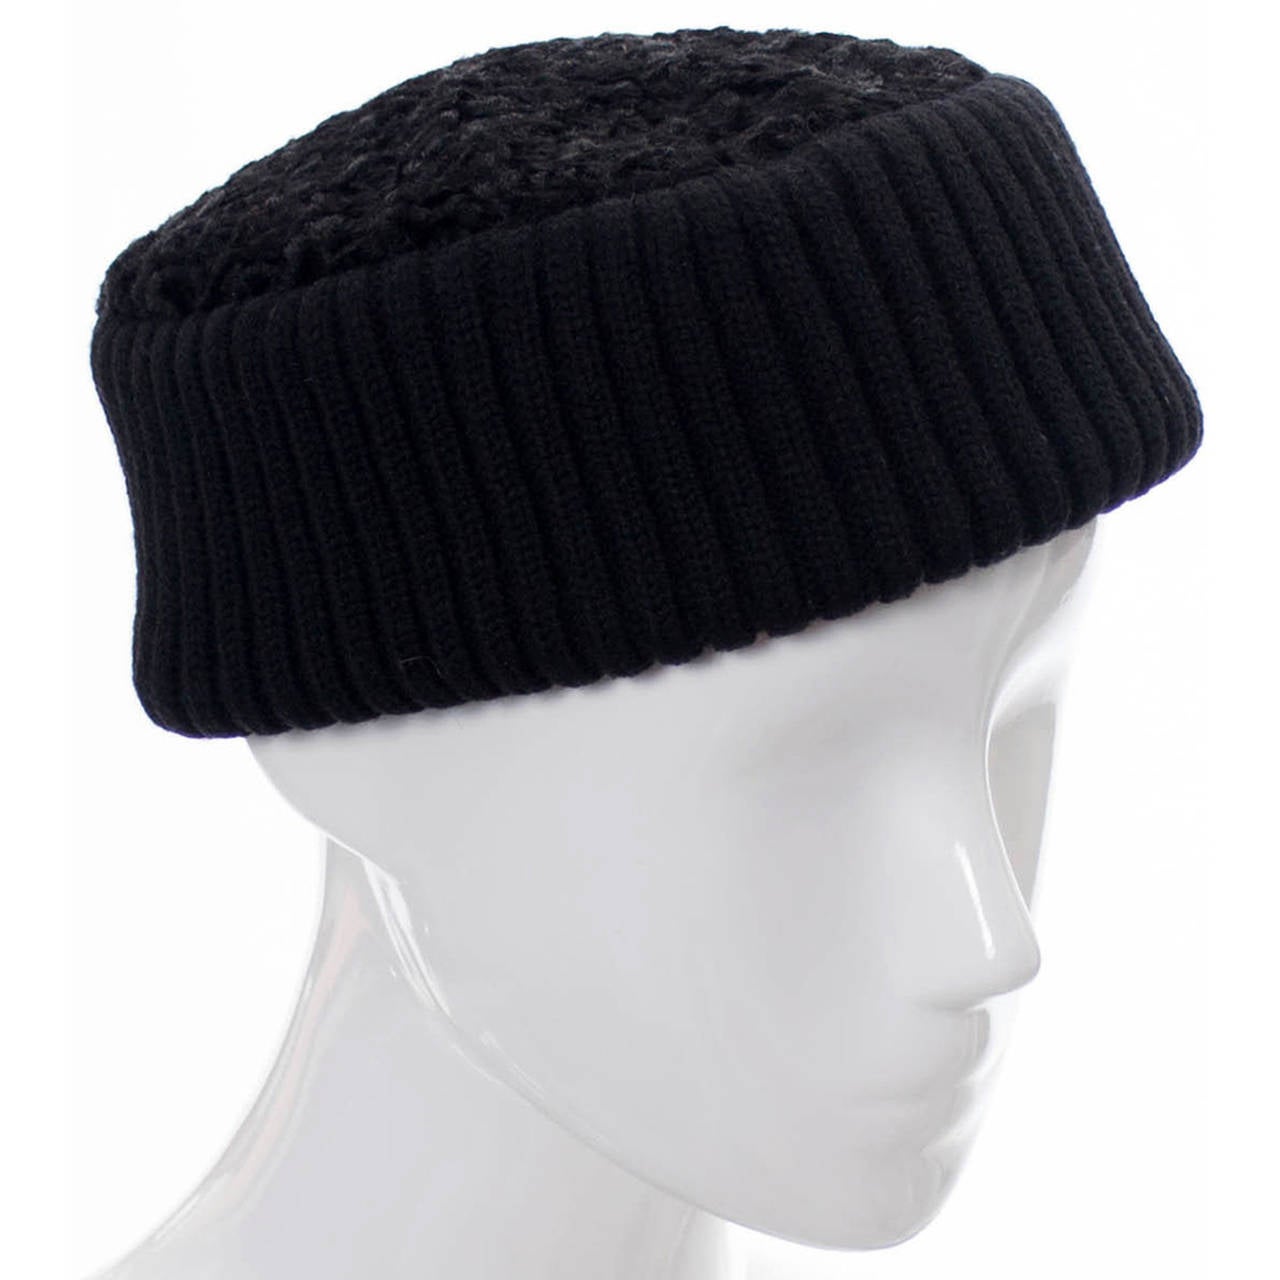 Yves Saint Laurent mint condition vintage curly lambswool hat with the 70's YSL 